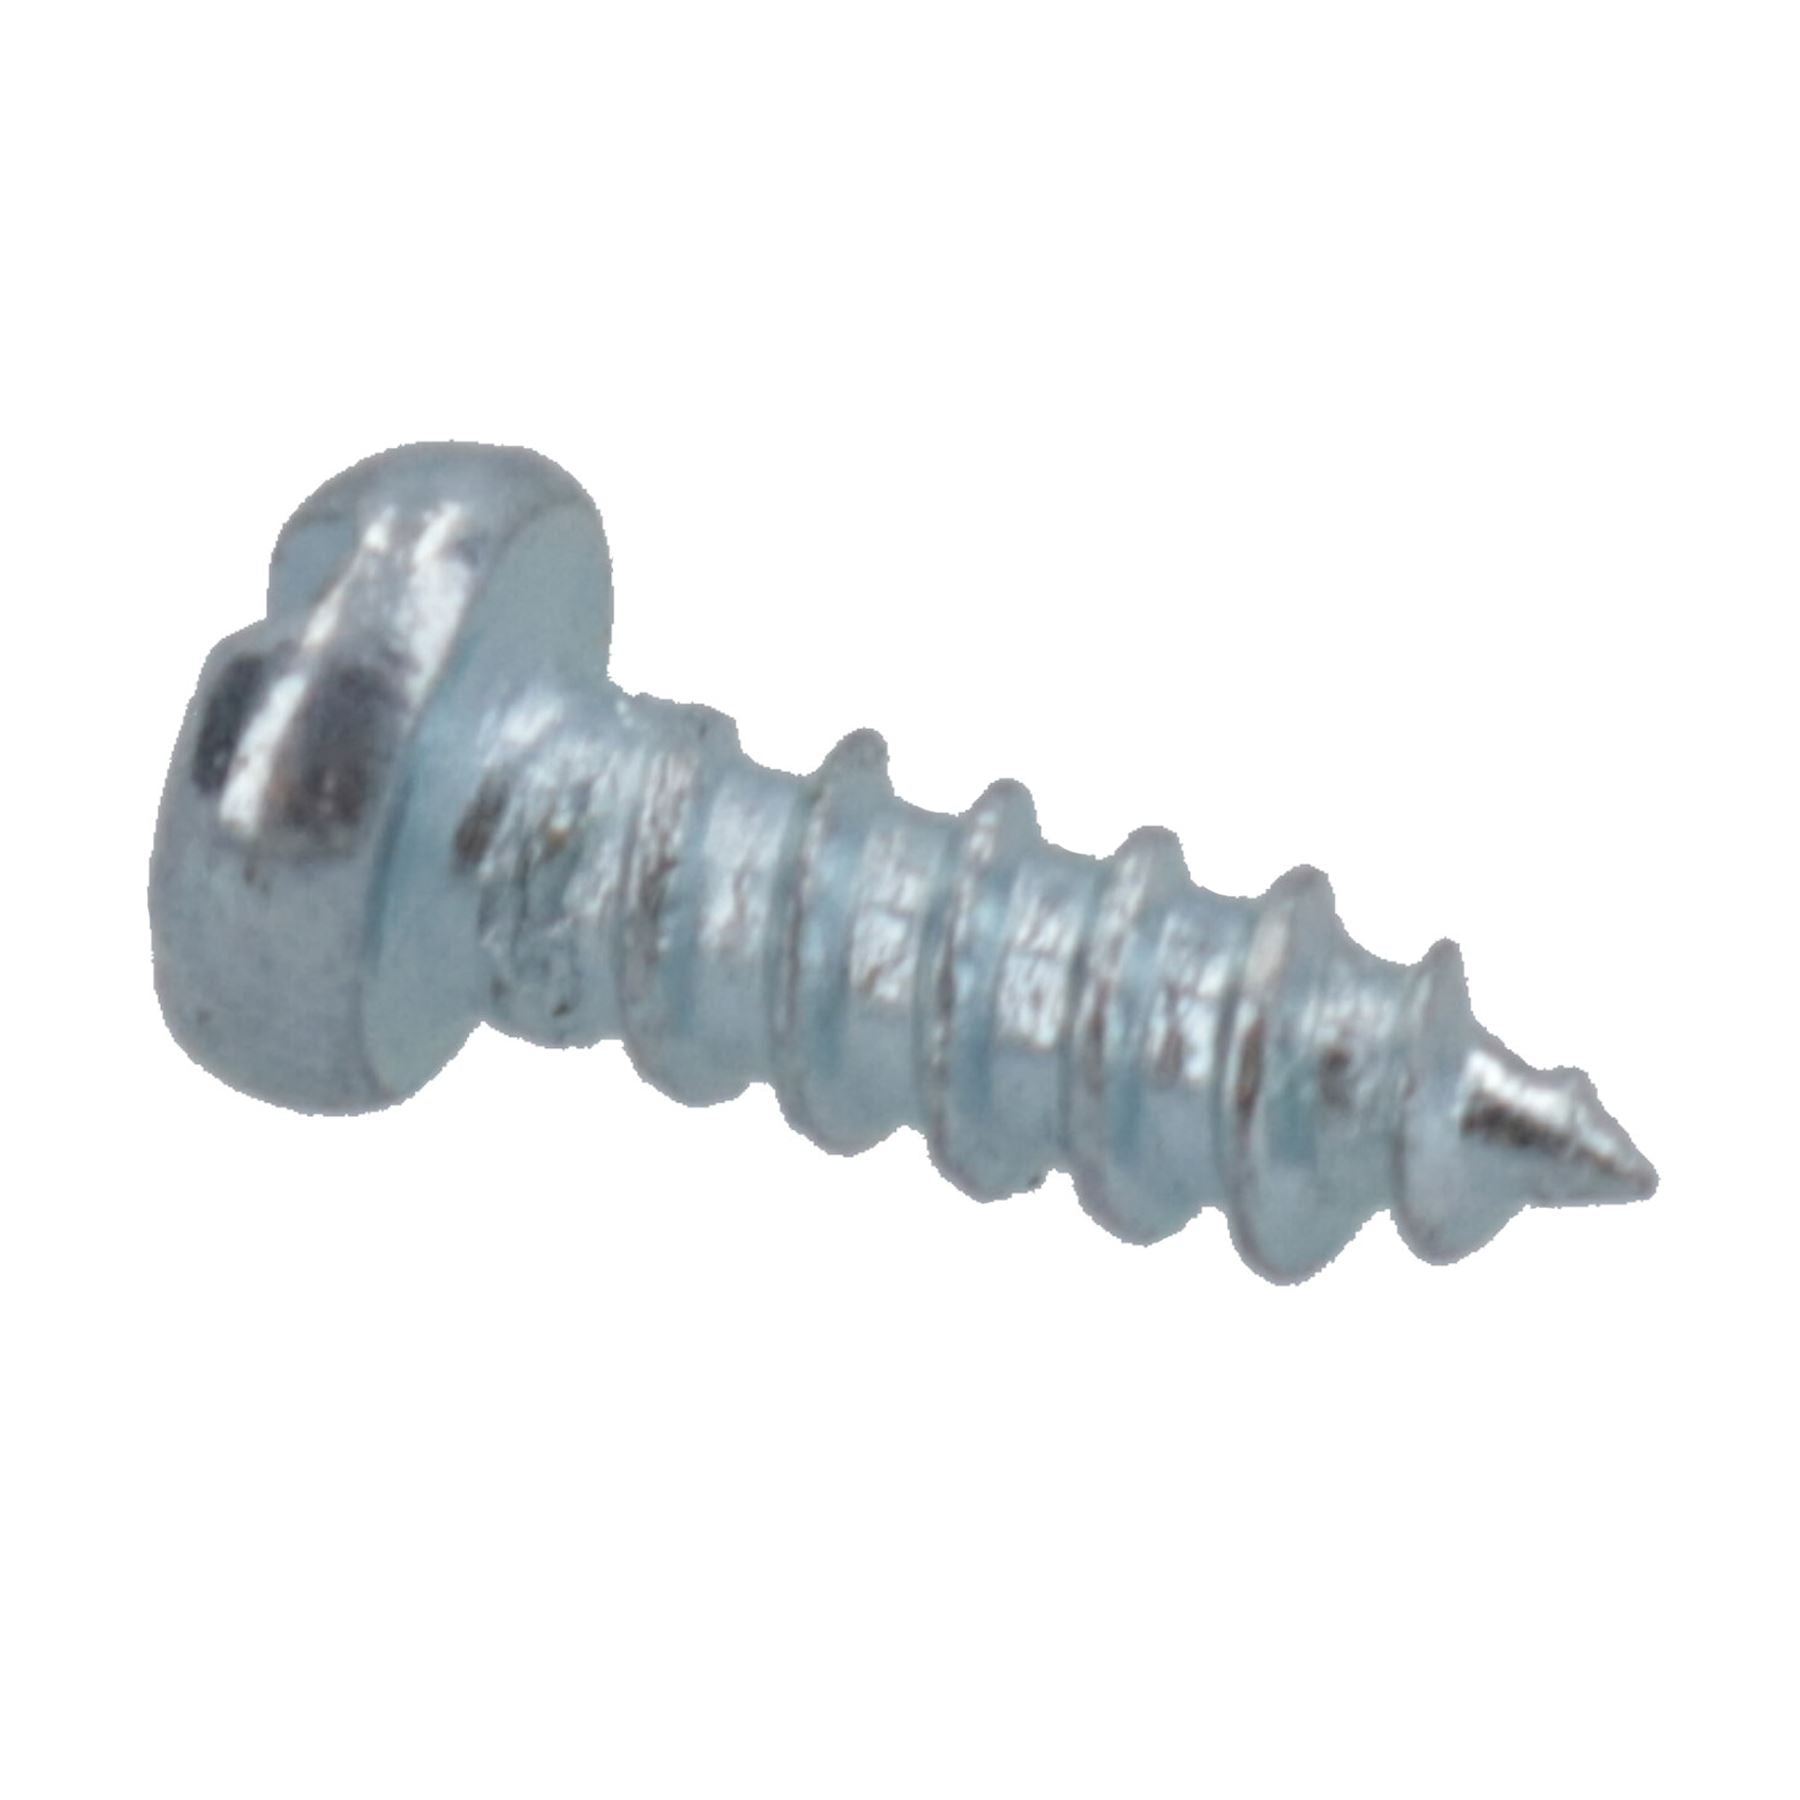 Self Tapping Screws PH2 Drive 3.5mm (width) x 12mm (length) Fasteners